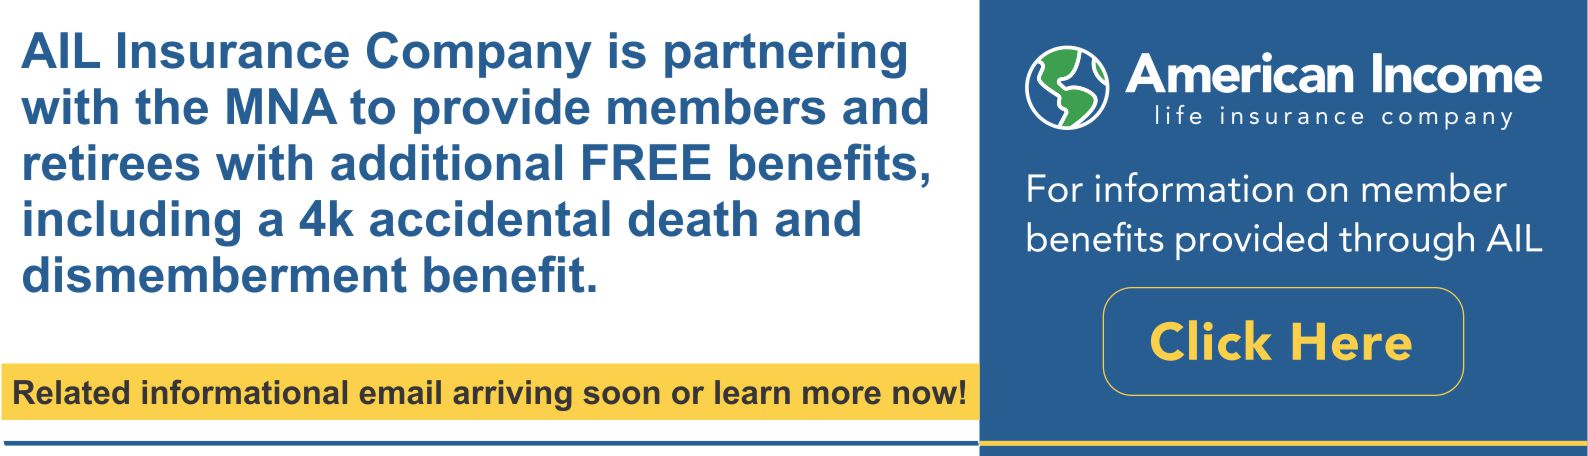 American Income Life Insurance Company, AIL is partnering with MNA to provide members with additional Free benefits.